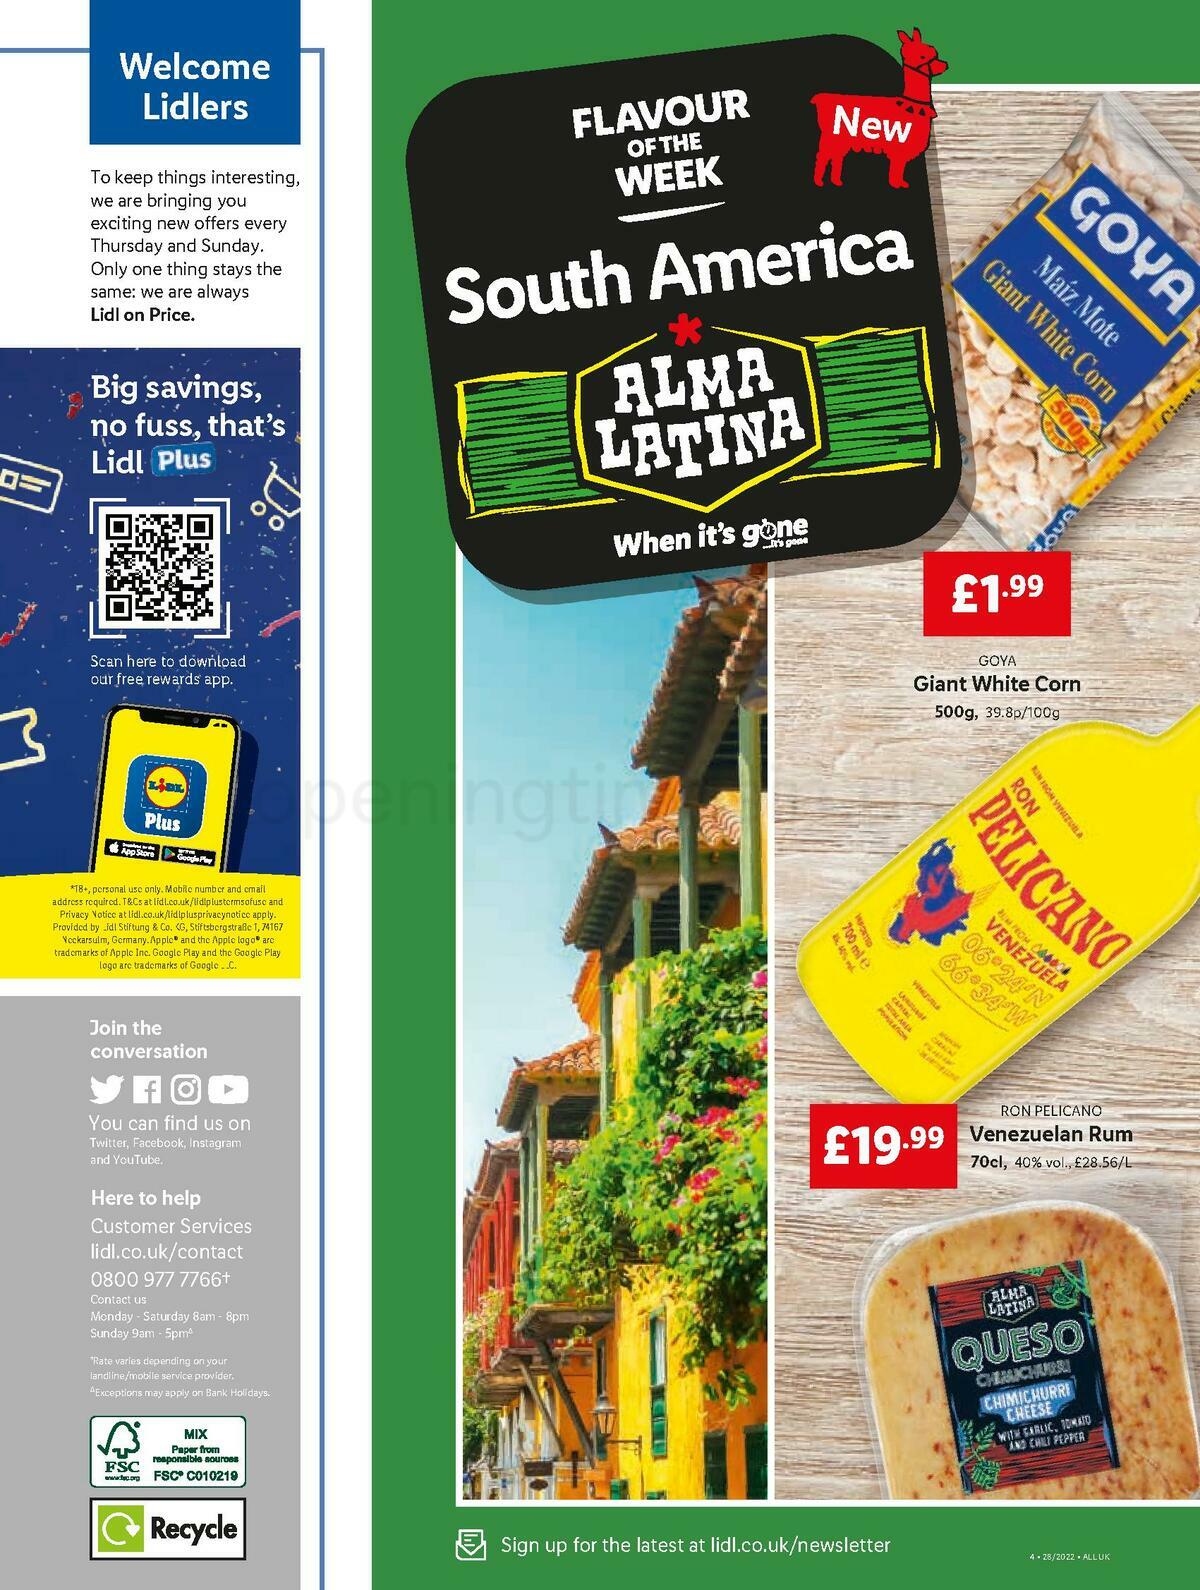 LIDL Offers from 14 July